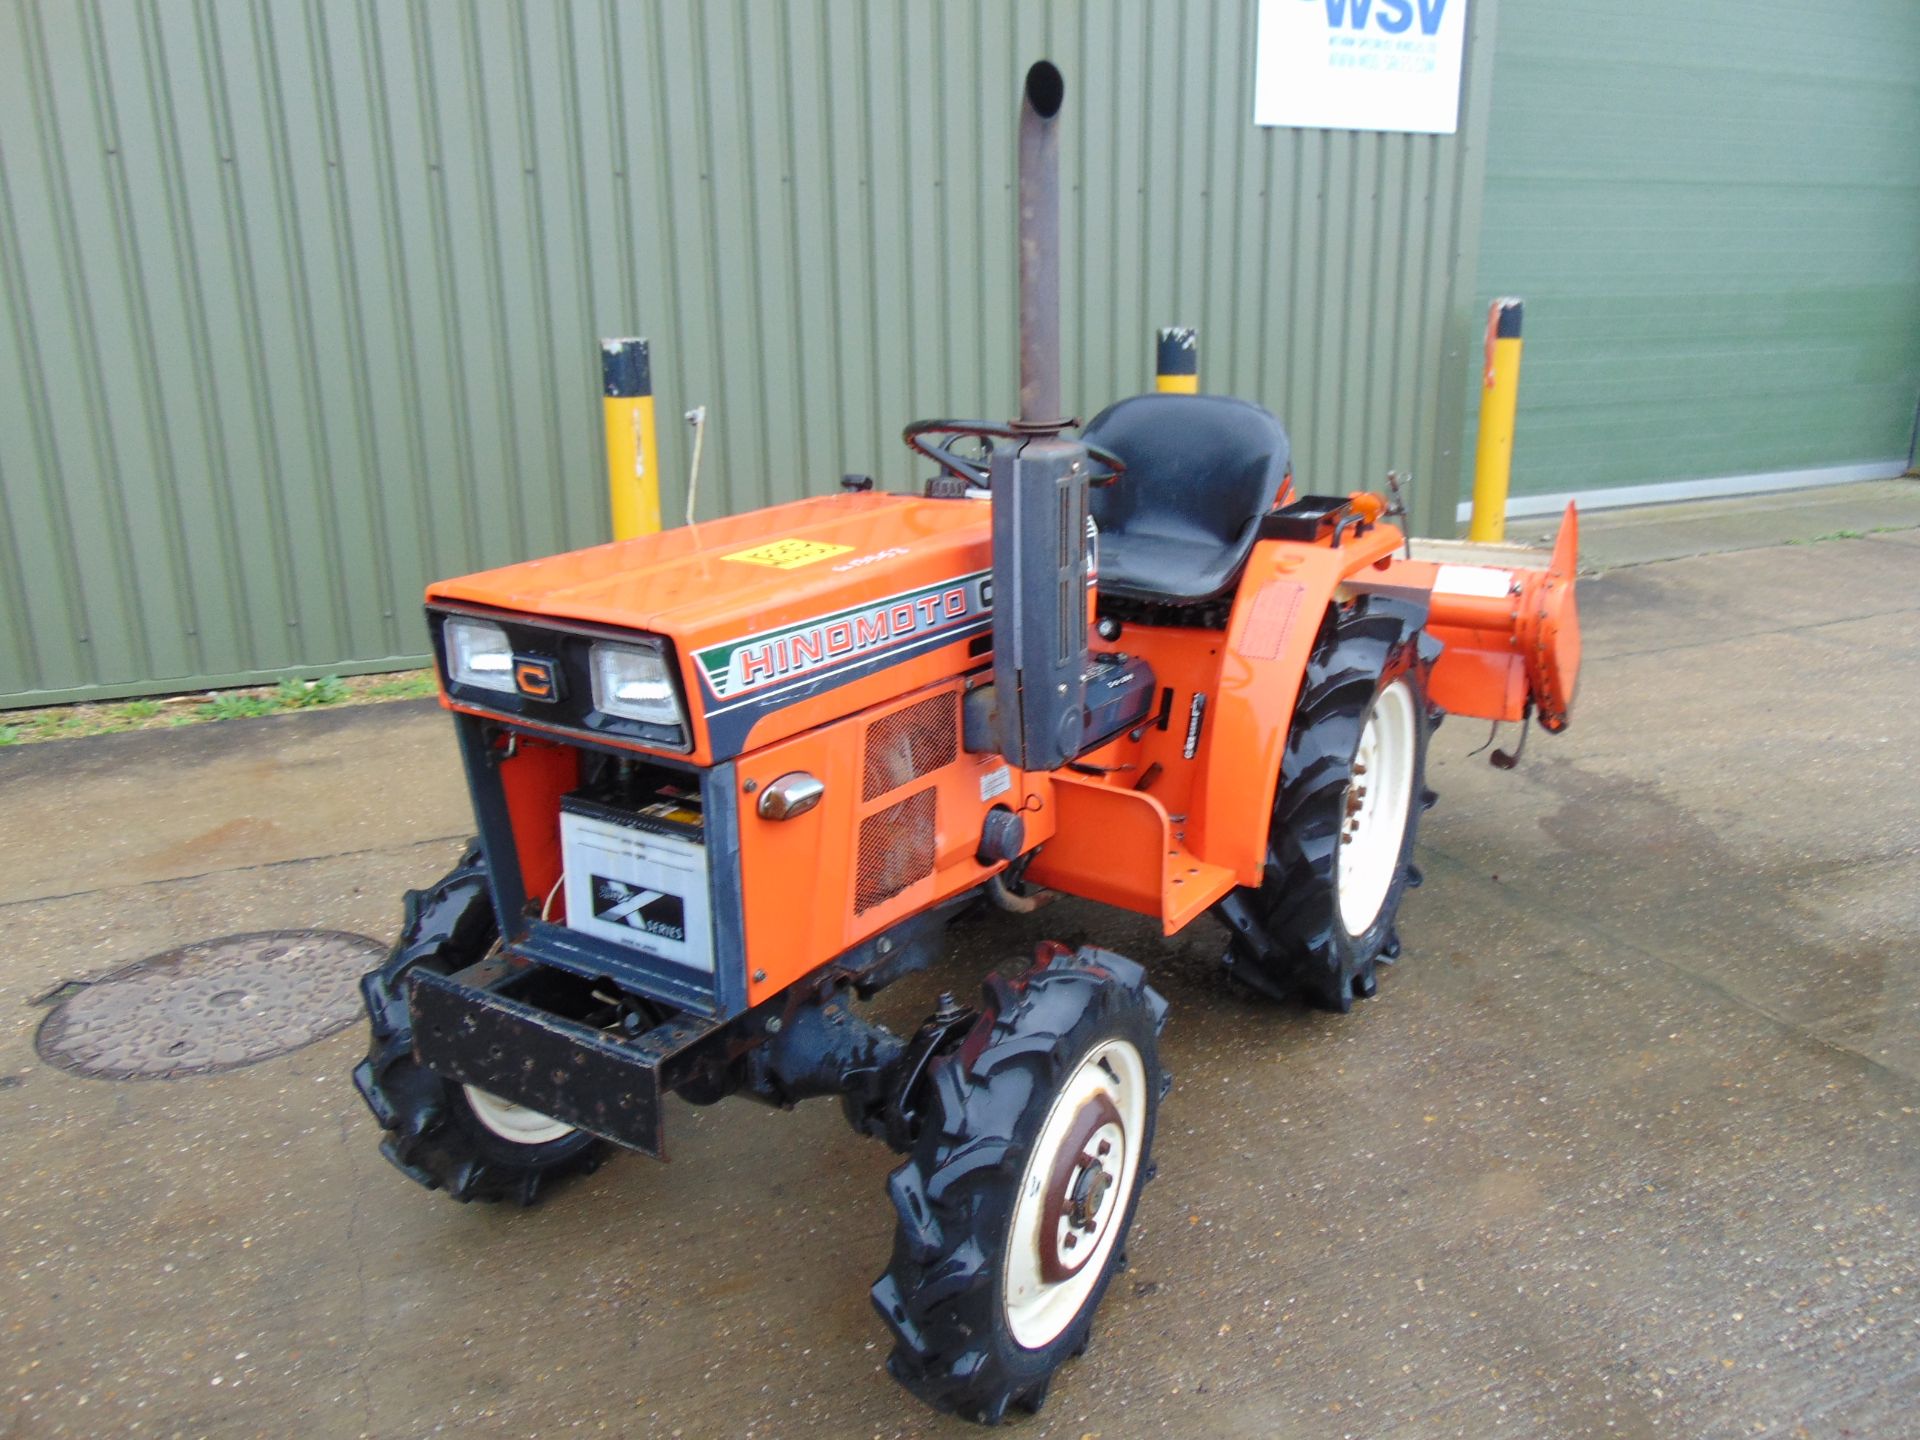 Hinomoto C174 4x4 Diesel Compact Tractor c/w Rotovator ONLY 492 HOURS!